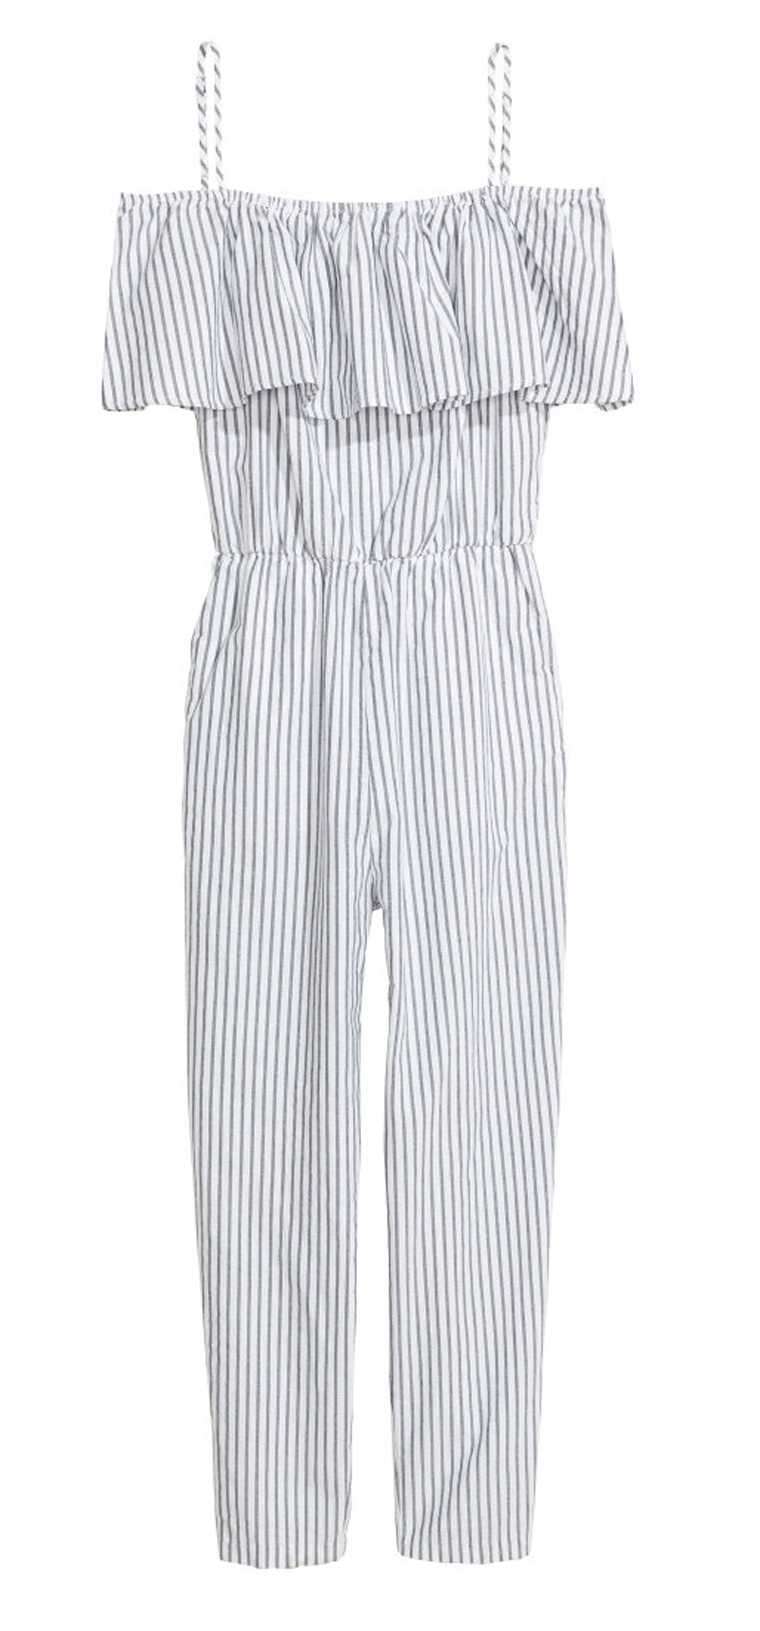 9 jumpsuits for summer 2017 | Femina.in